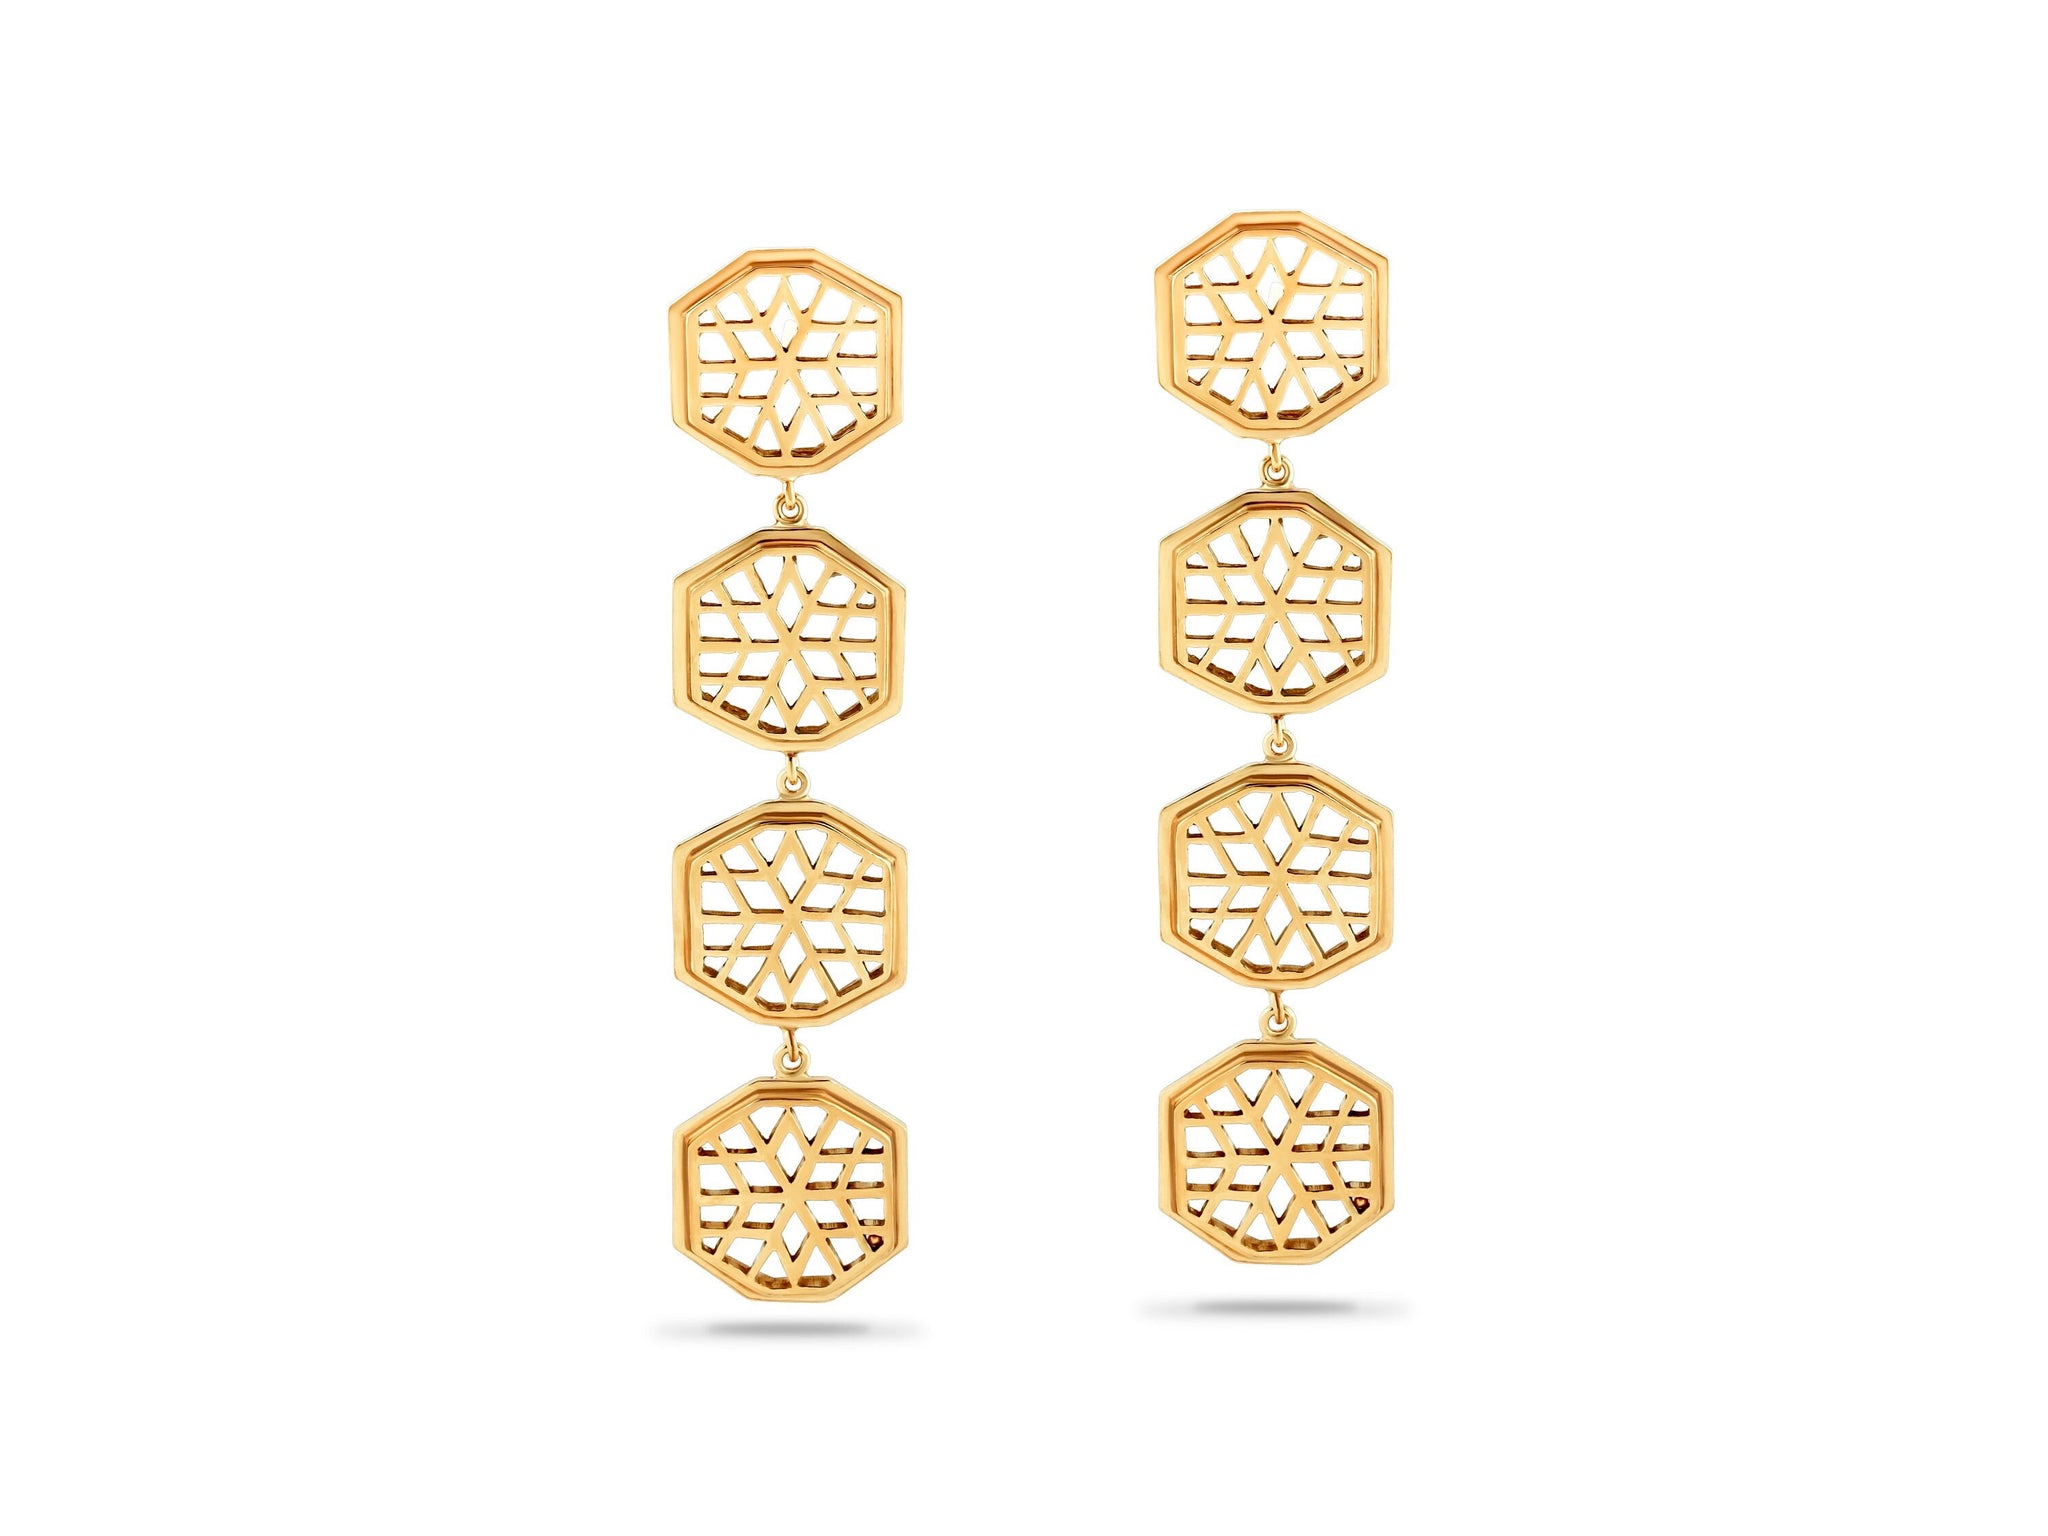 Handmade Afghan Gold Plated Silver Chandelier Earrings Geometric Elegant Inspired Jewelry Tessellated Motif Sun Abstract Gift for Her